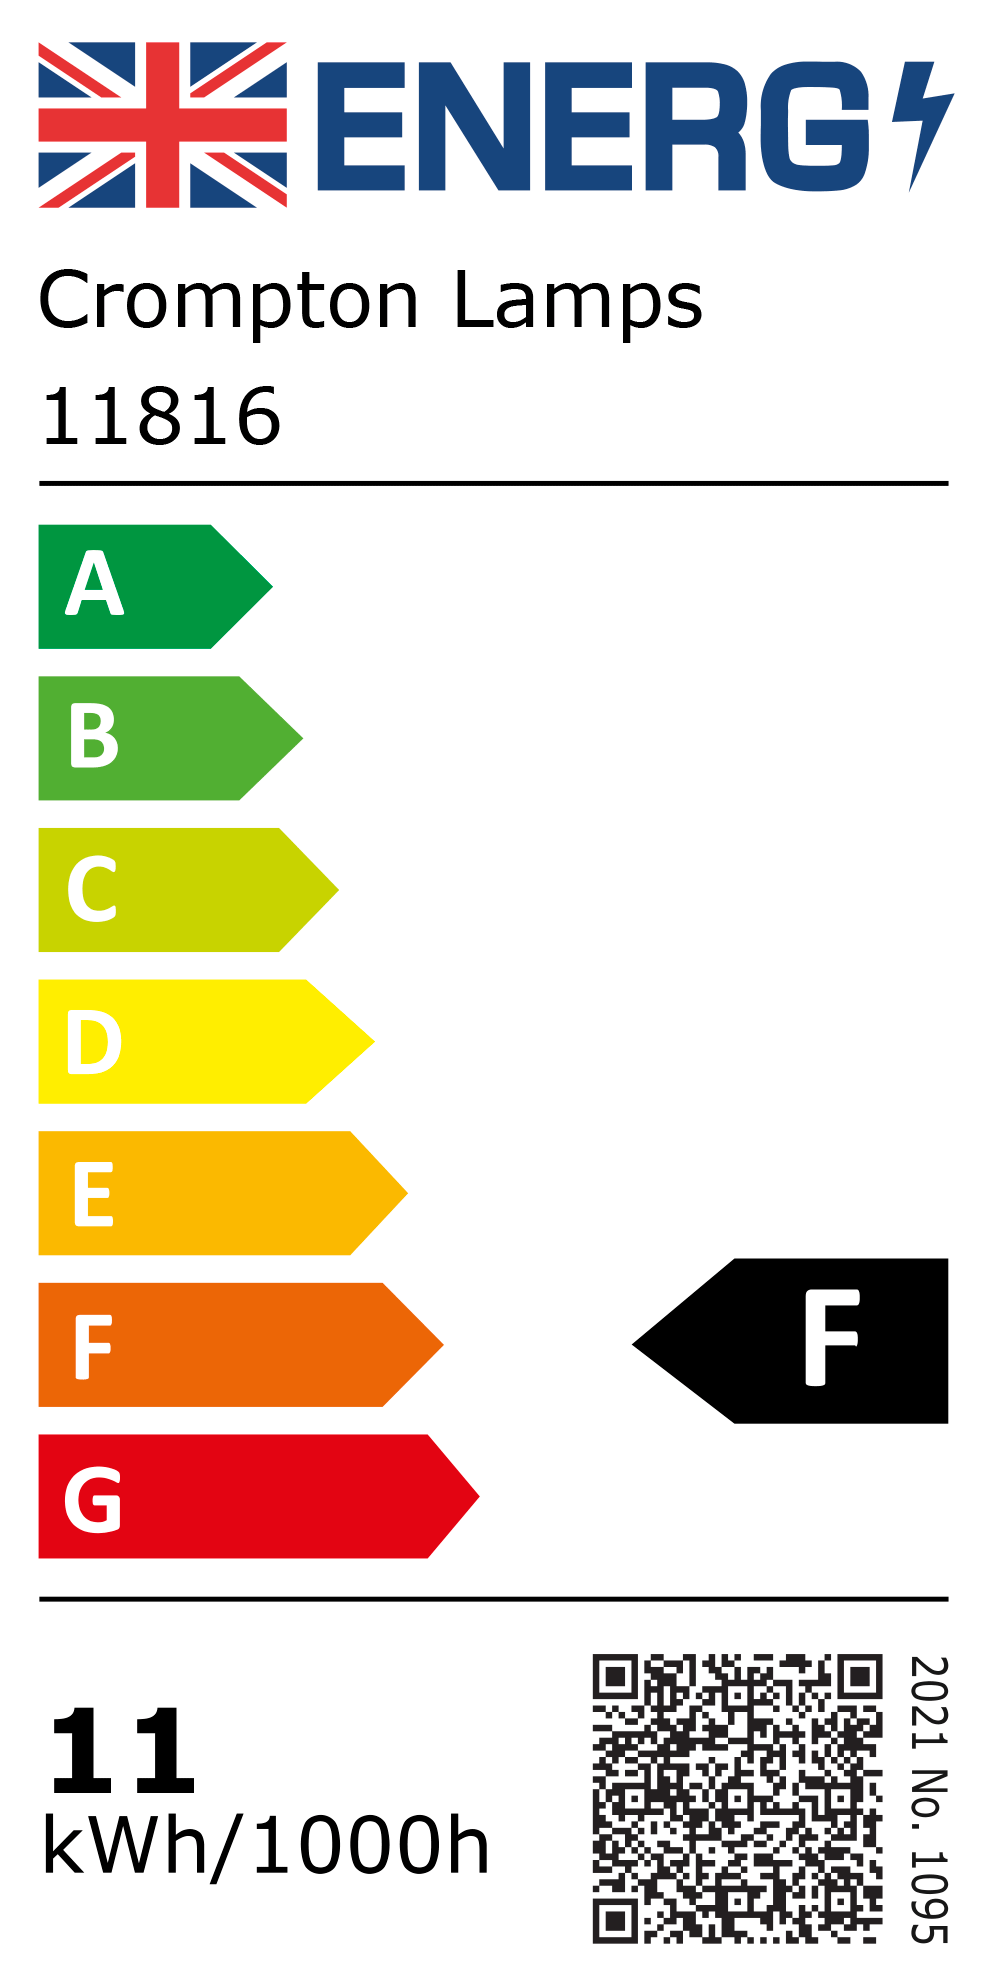 New 2021 Energy Rating Label: Stock Code 11816